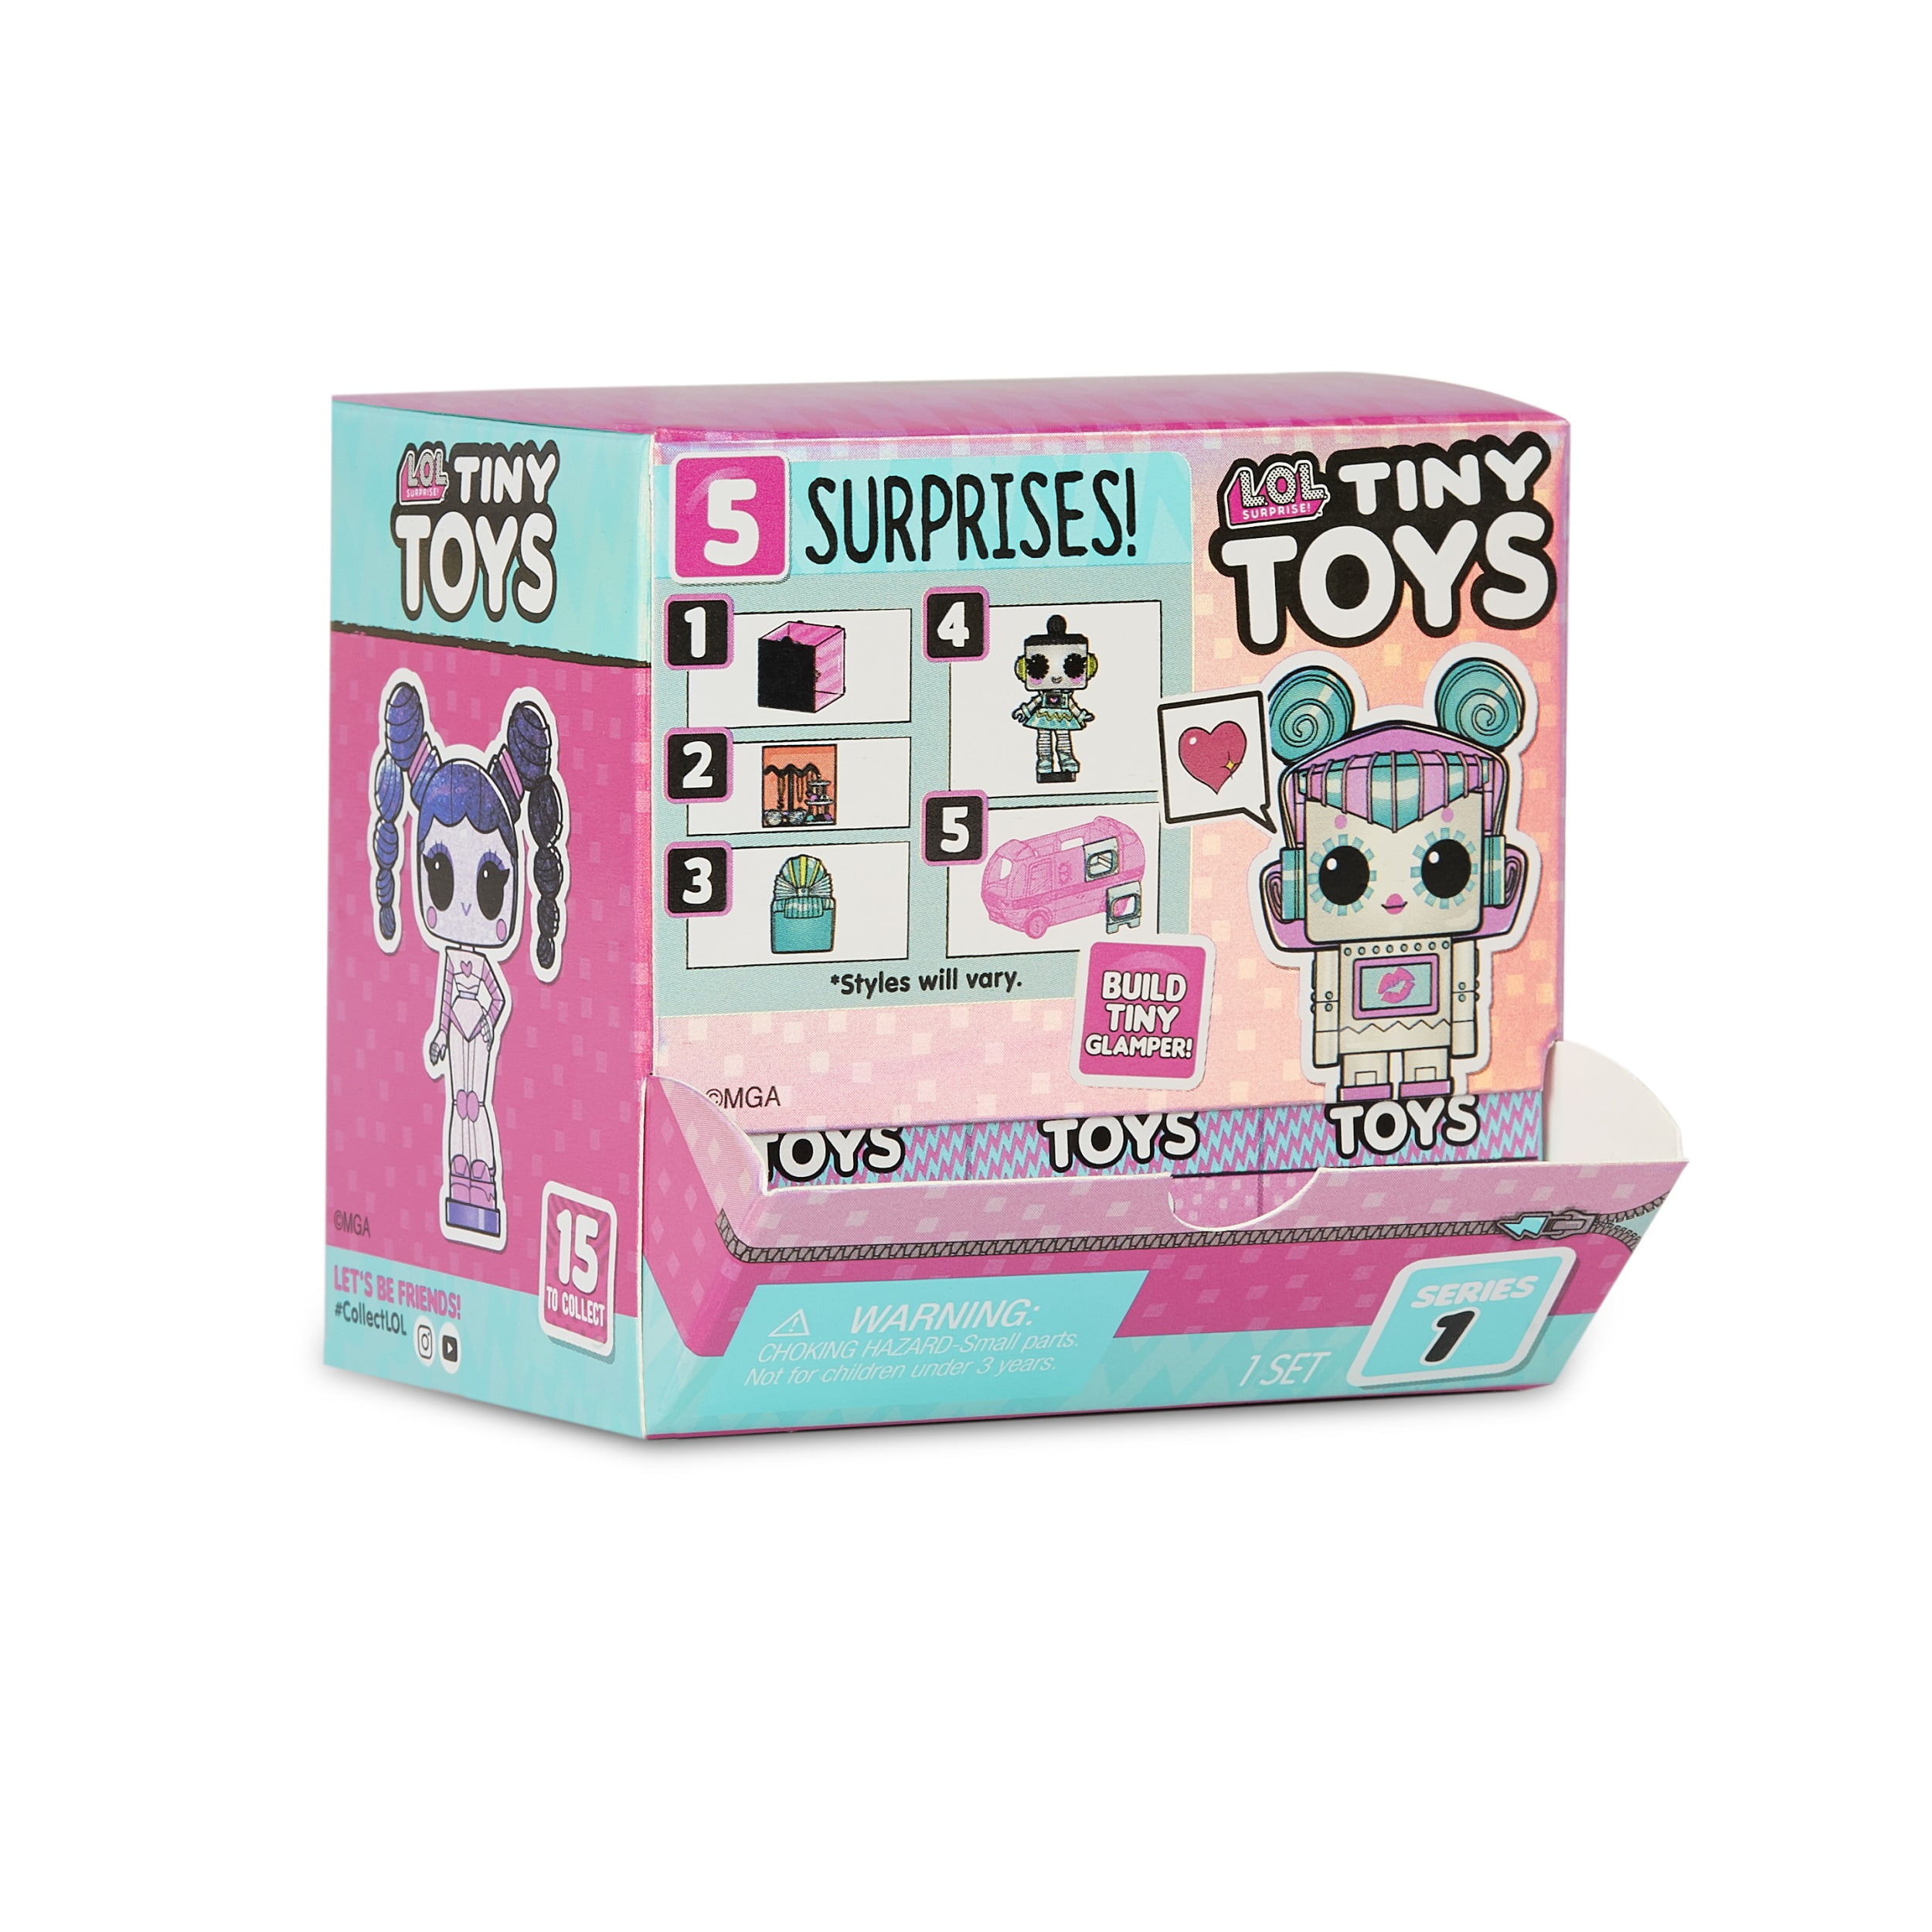 L.O.L Surprise Tiny Toys Collect to Build a Tiny Glamper for sale online 